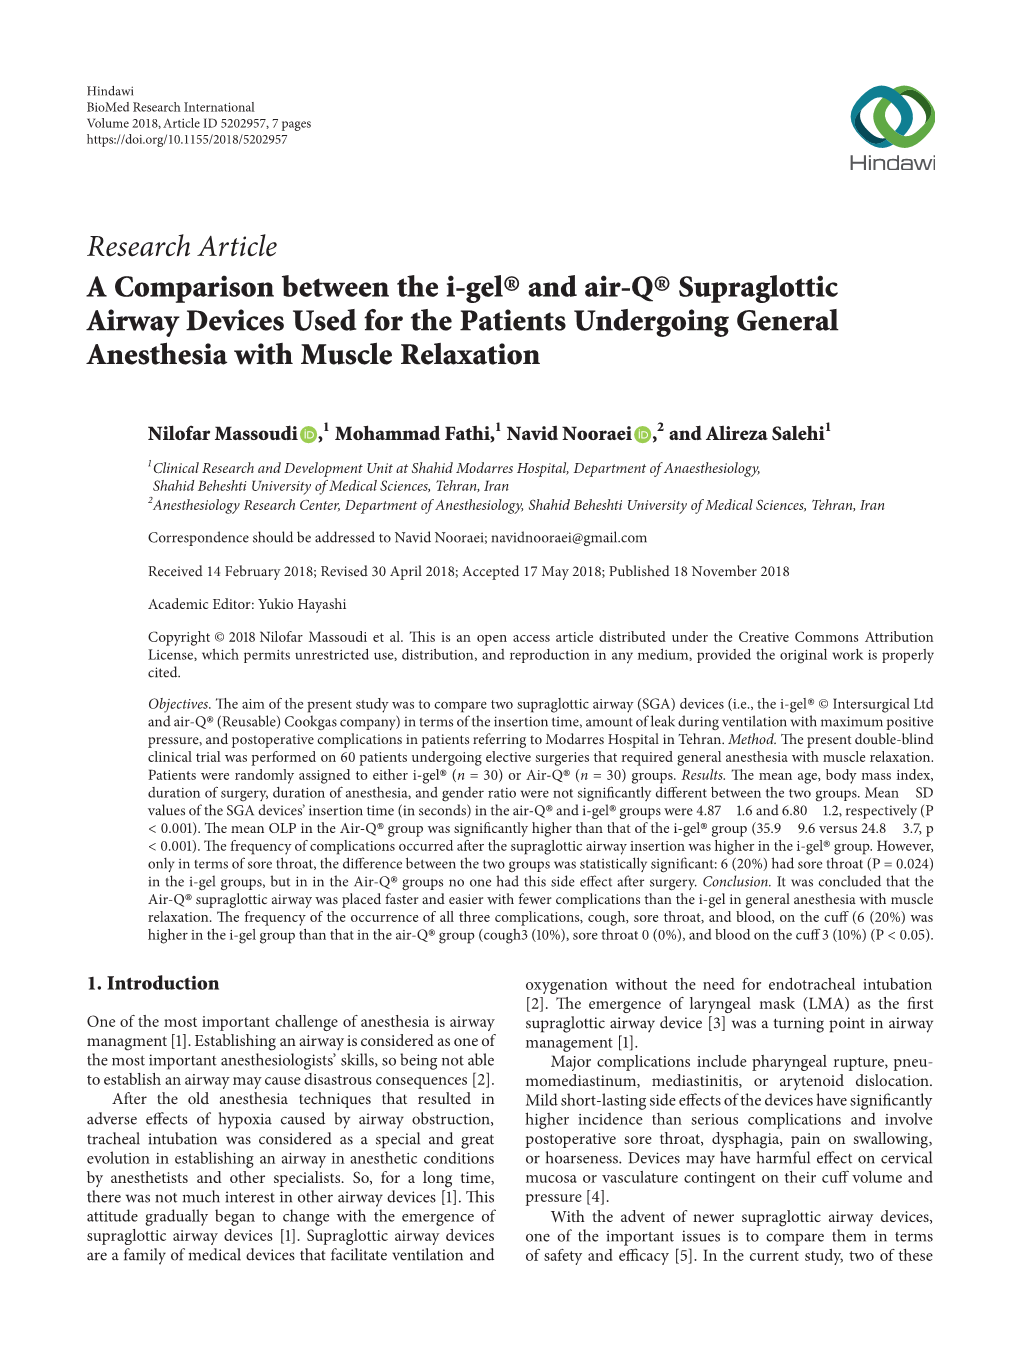 A Comparison Between the I-Gel® and Air-Q® Supraglottic Airway Devices